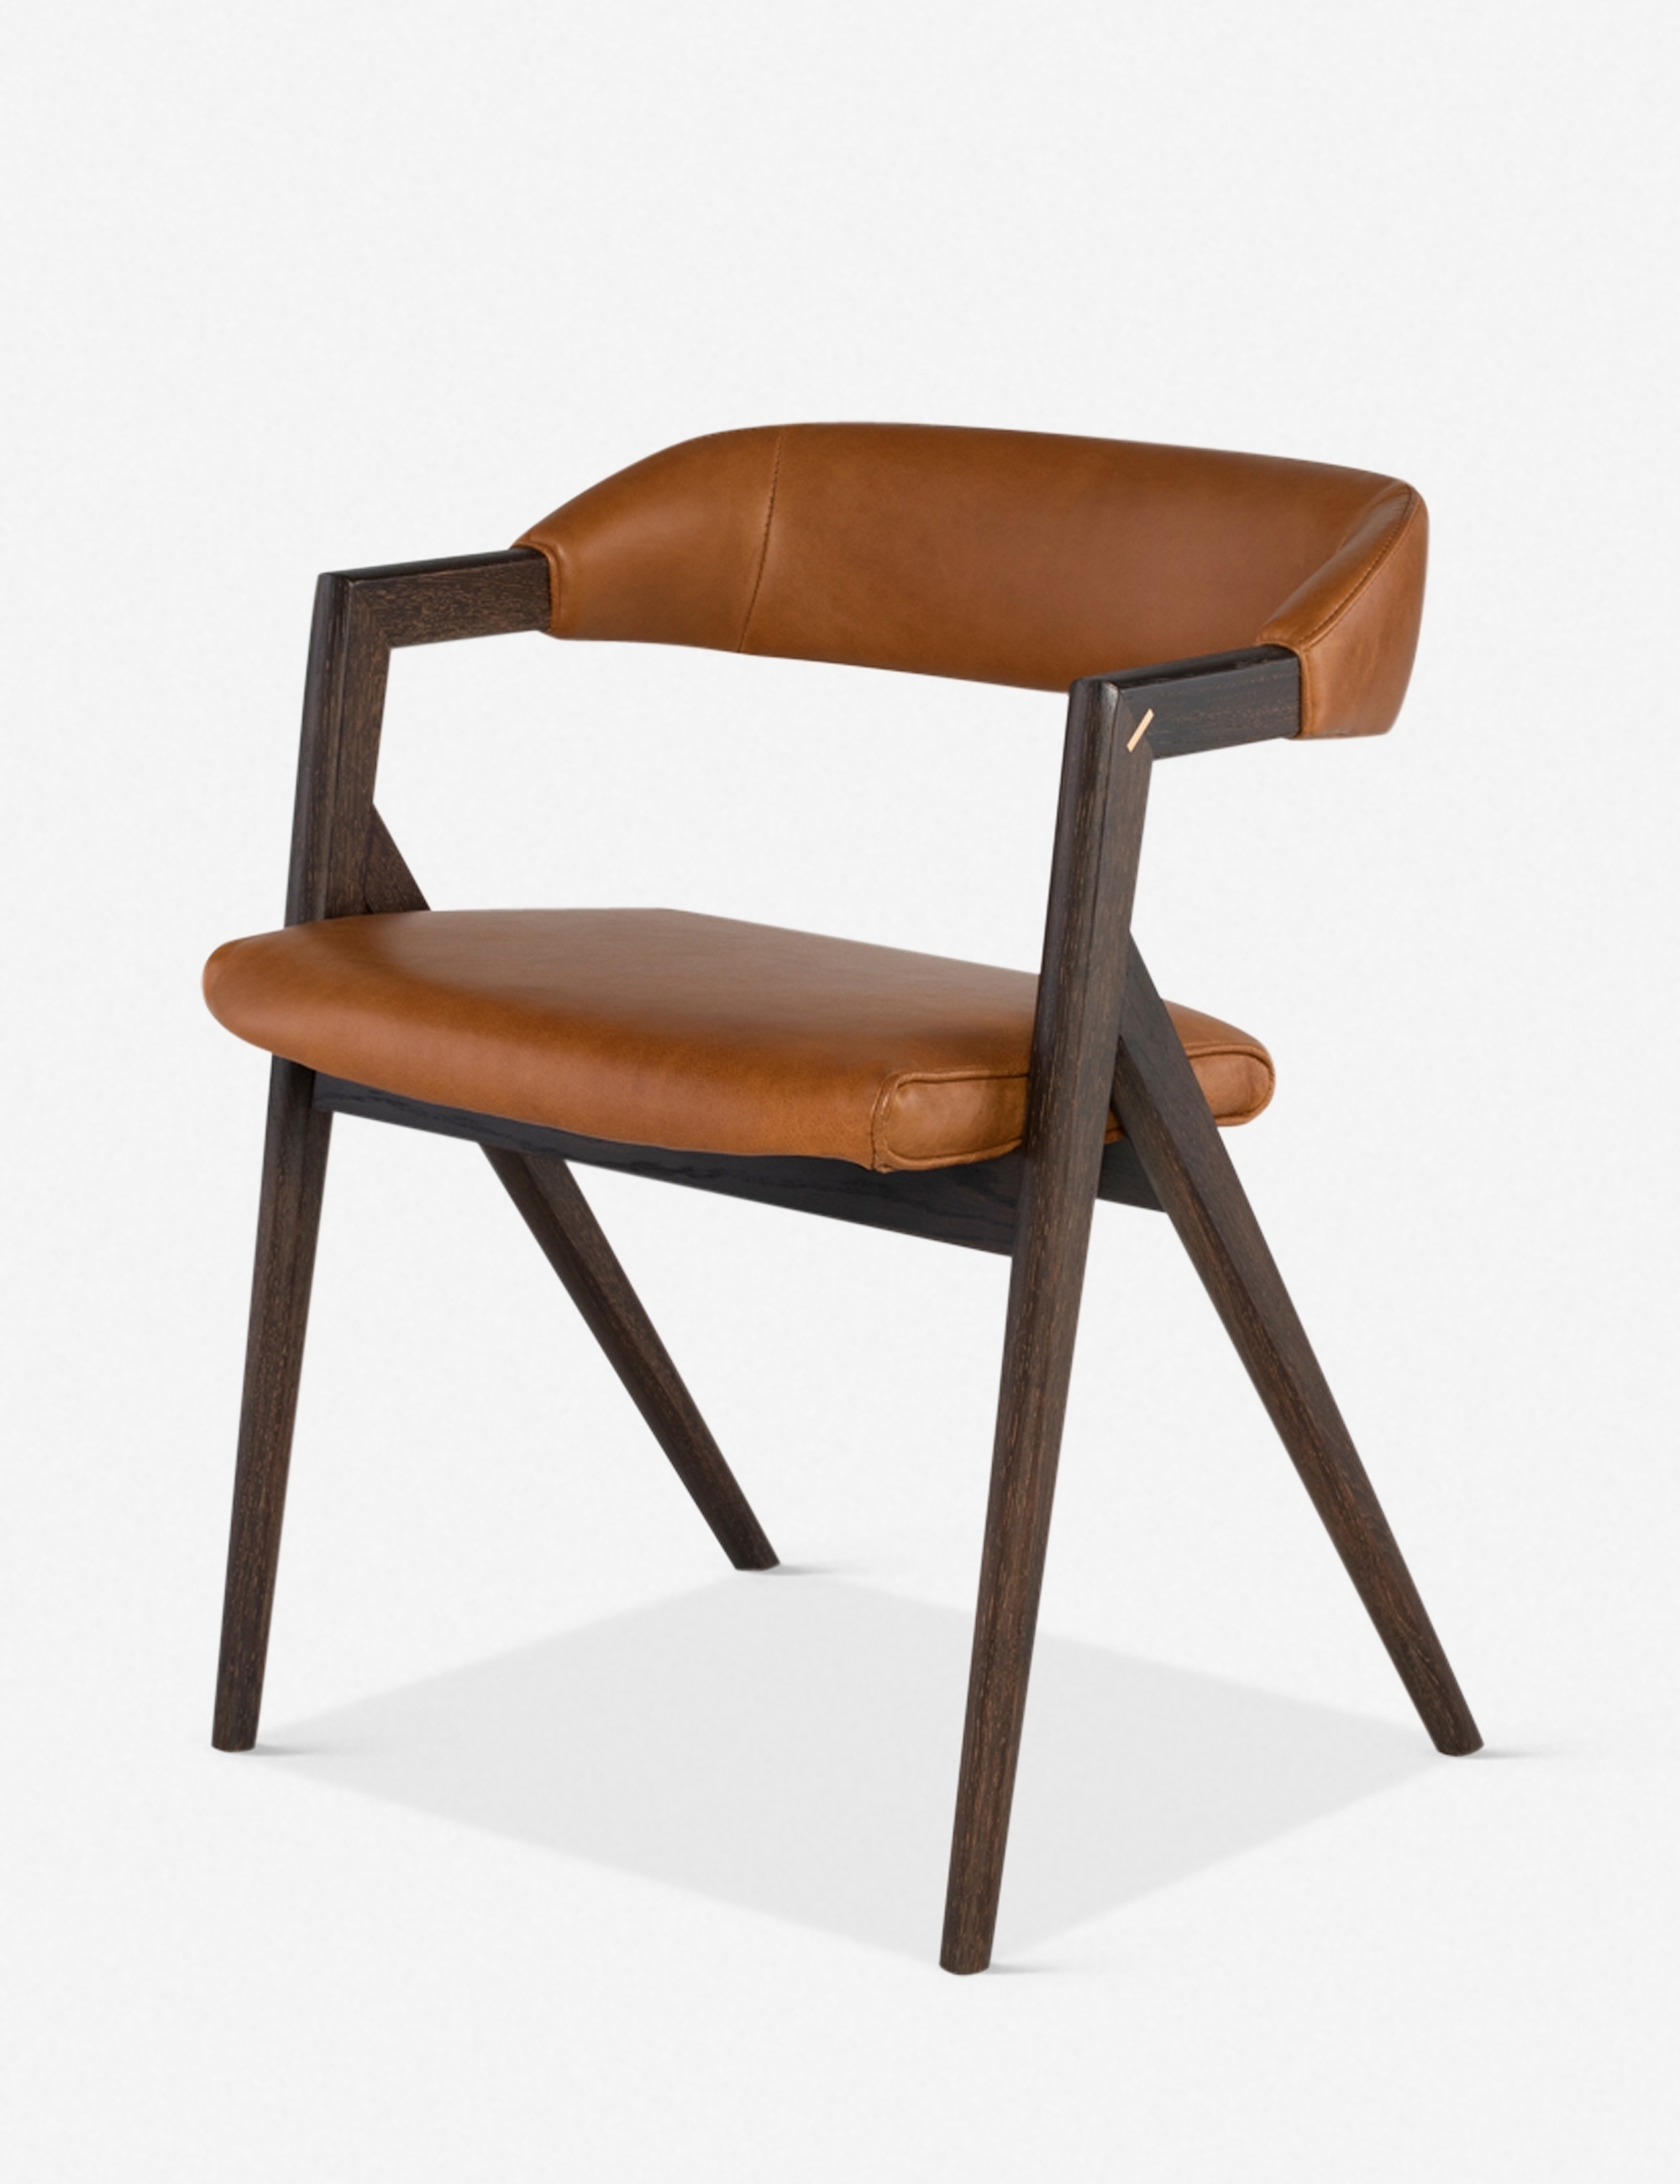 Sandia Leather Dining Chair - Image 2